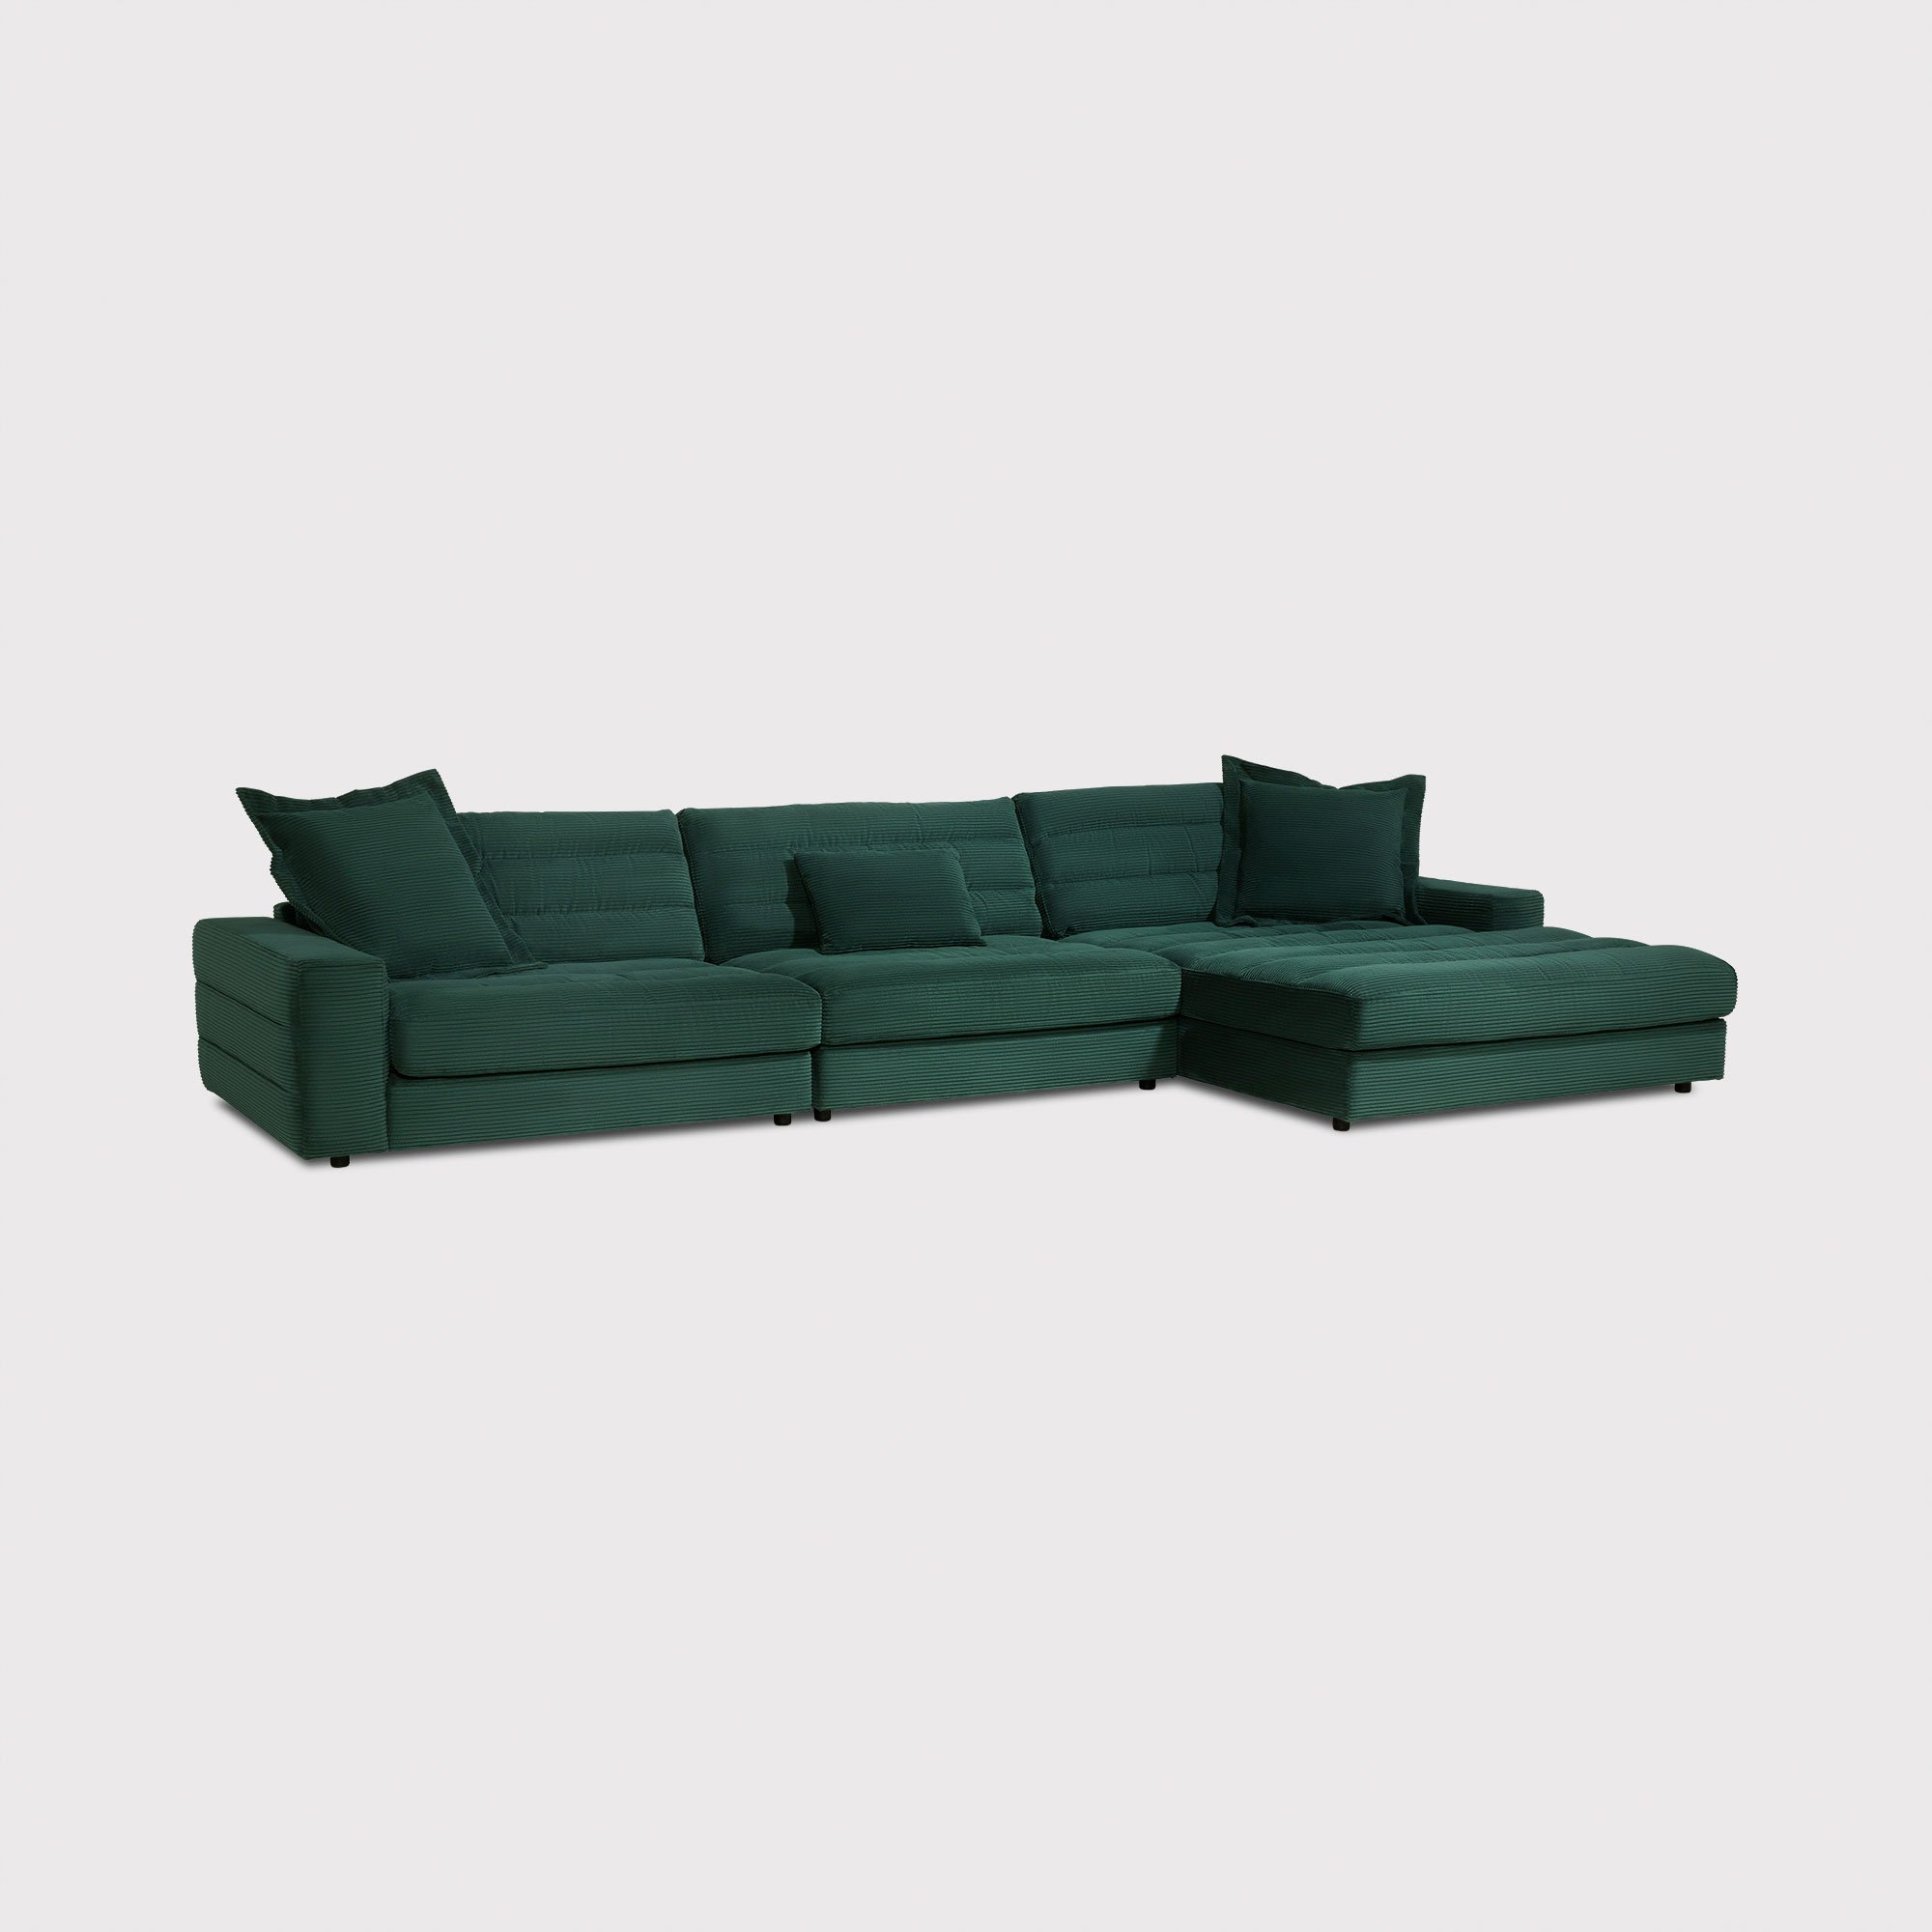 Twain Large Chaise Sofa Right, Green Fabric | Barker & Stonehouse